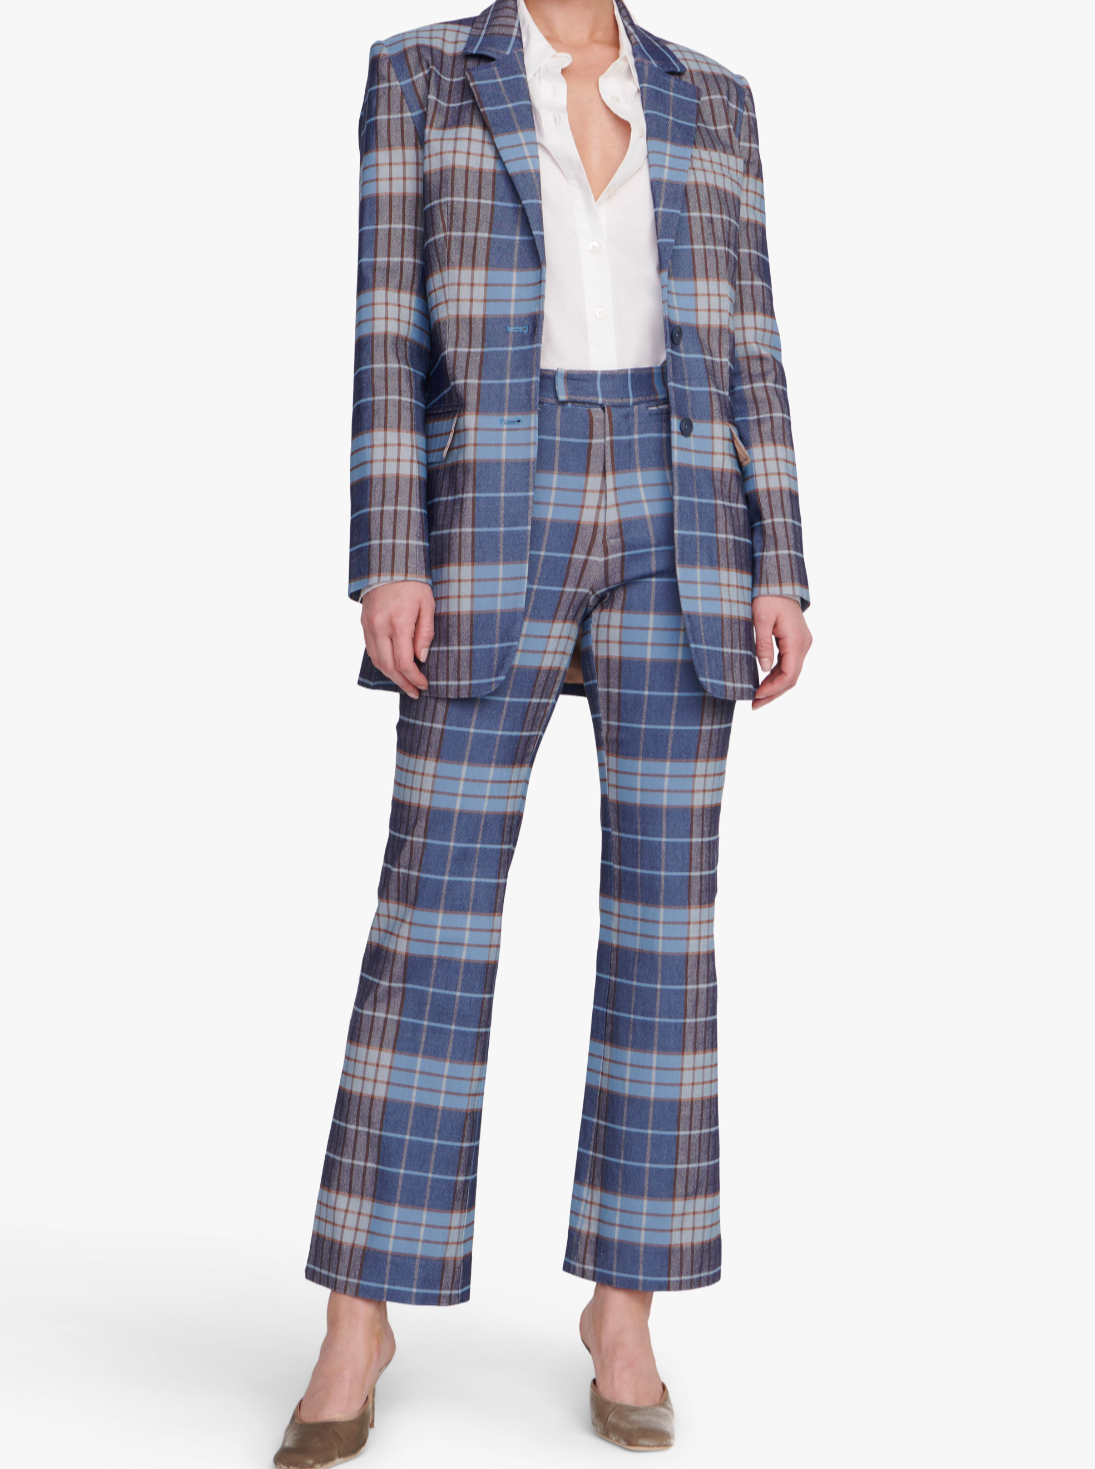 Pirouette Pant | French Blue Plaid-Sea Biscuit Del Mar